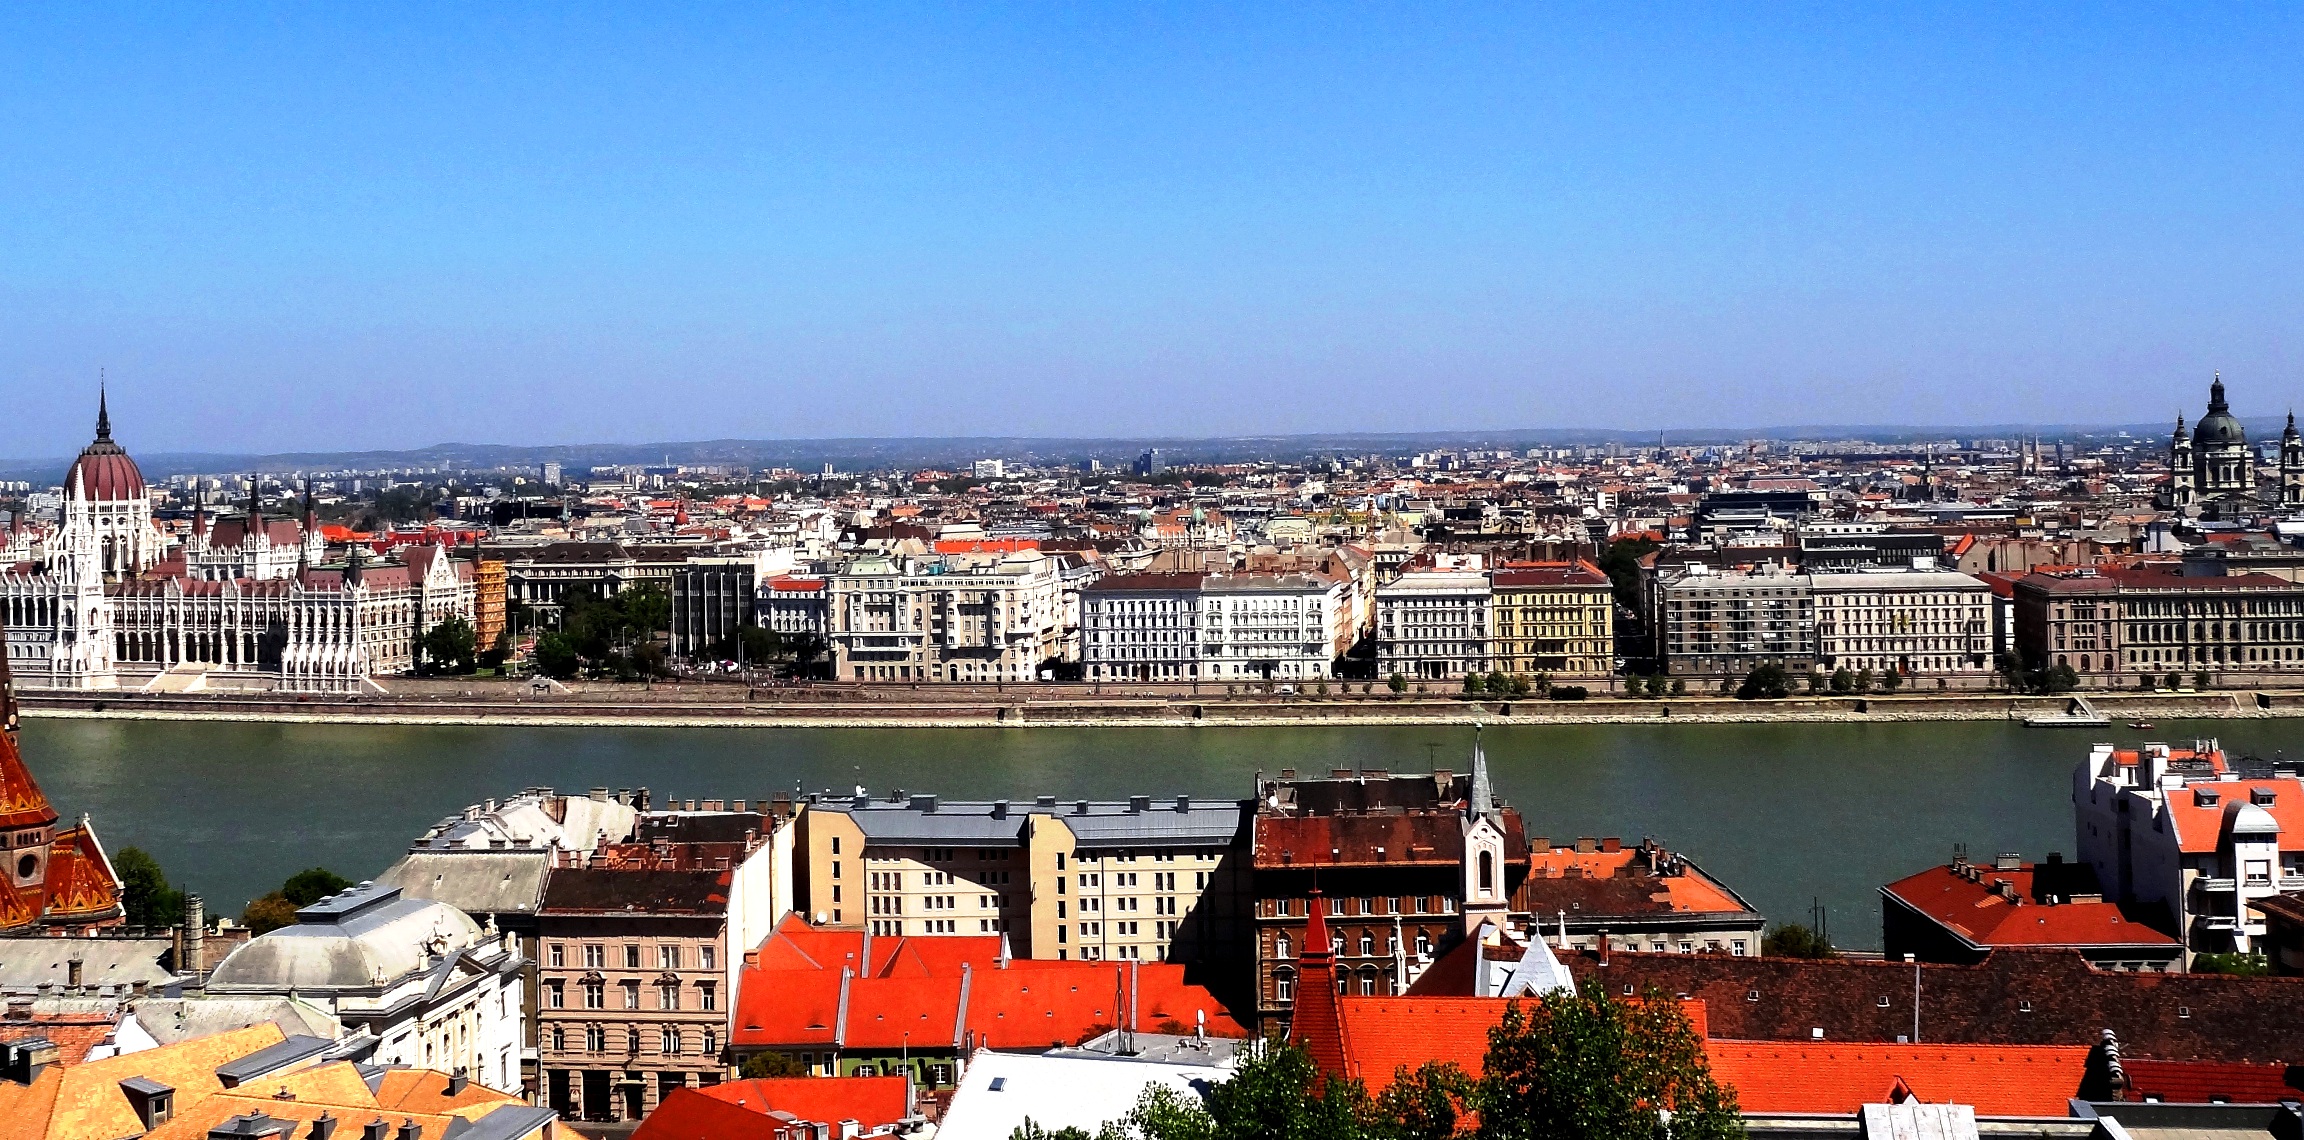 Danube River Cruise - Sailing Across The History